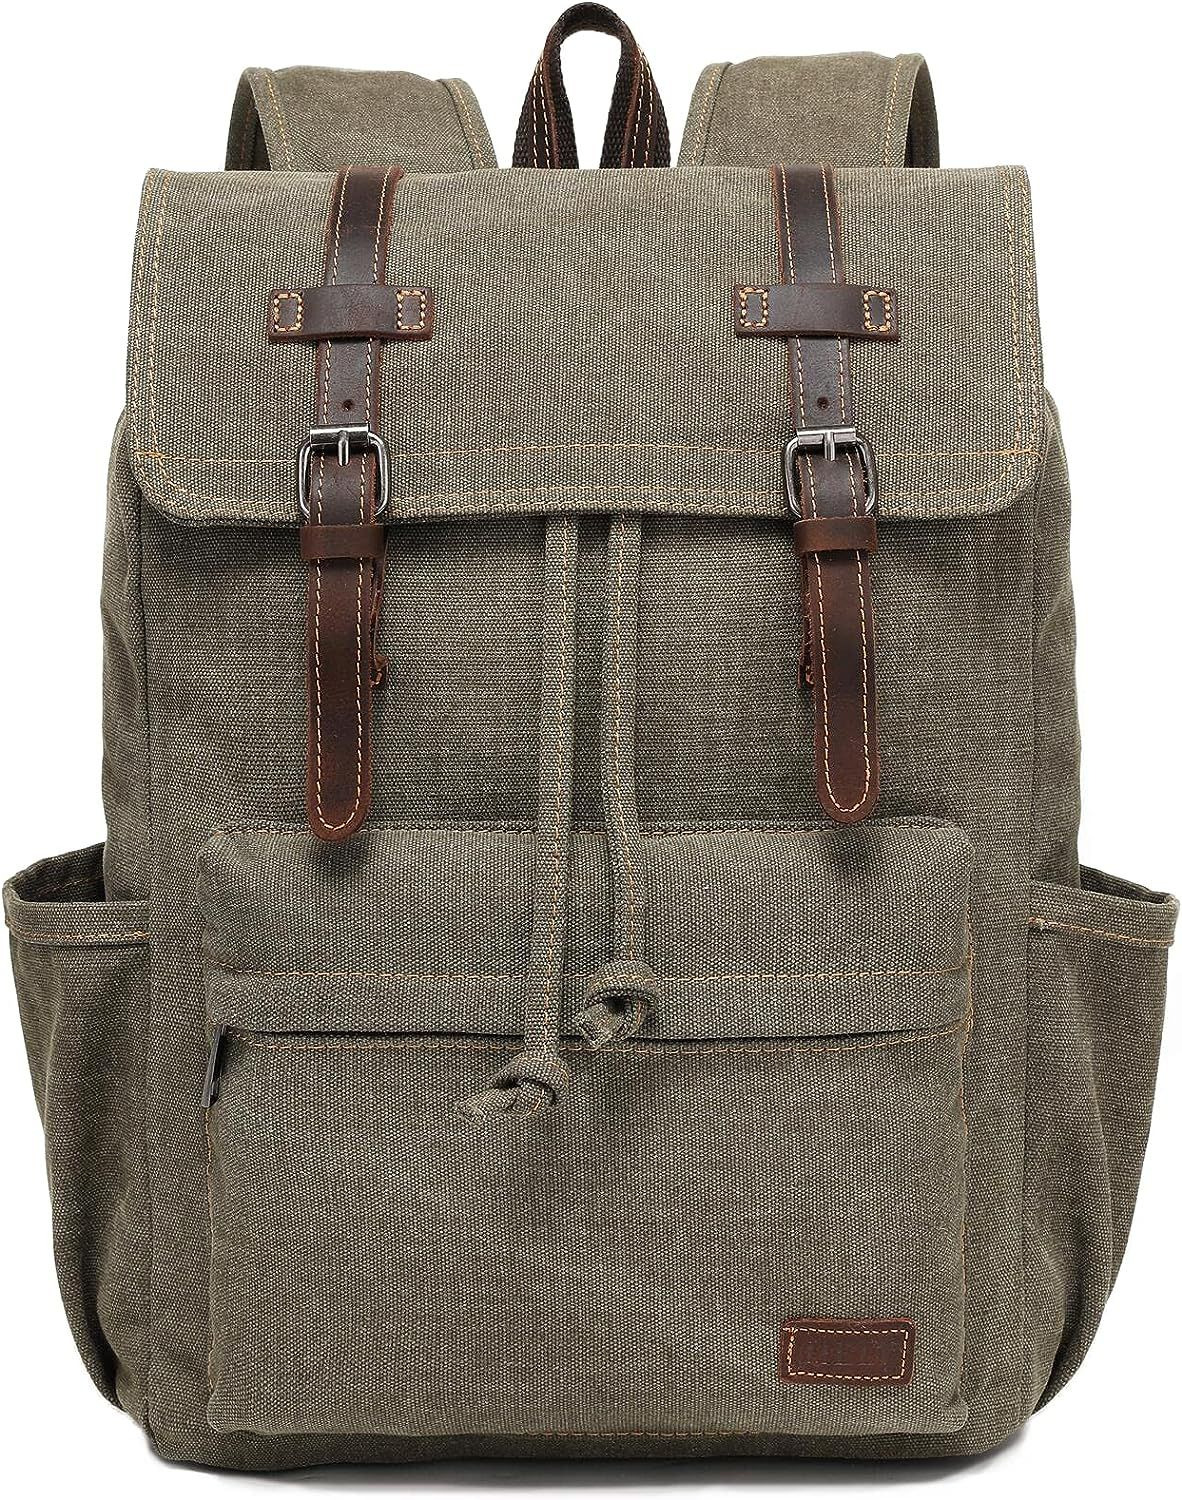 JIELV Canvas Vintage Backpack,Mens Travel Rucksack,Casual Daypack Army Green 